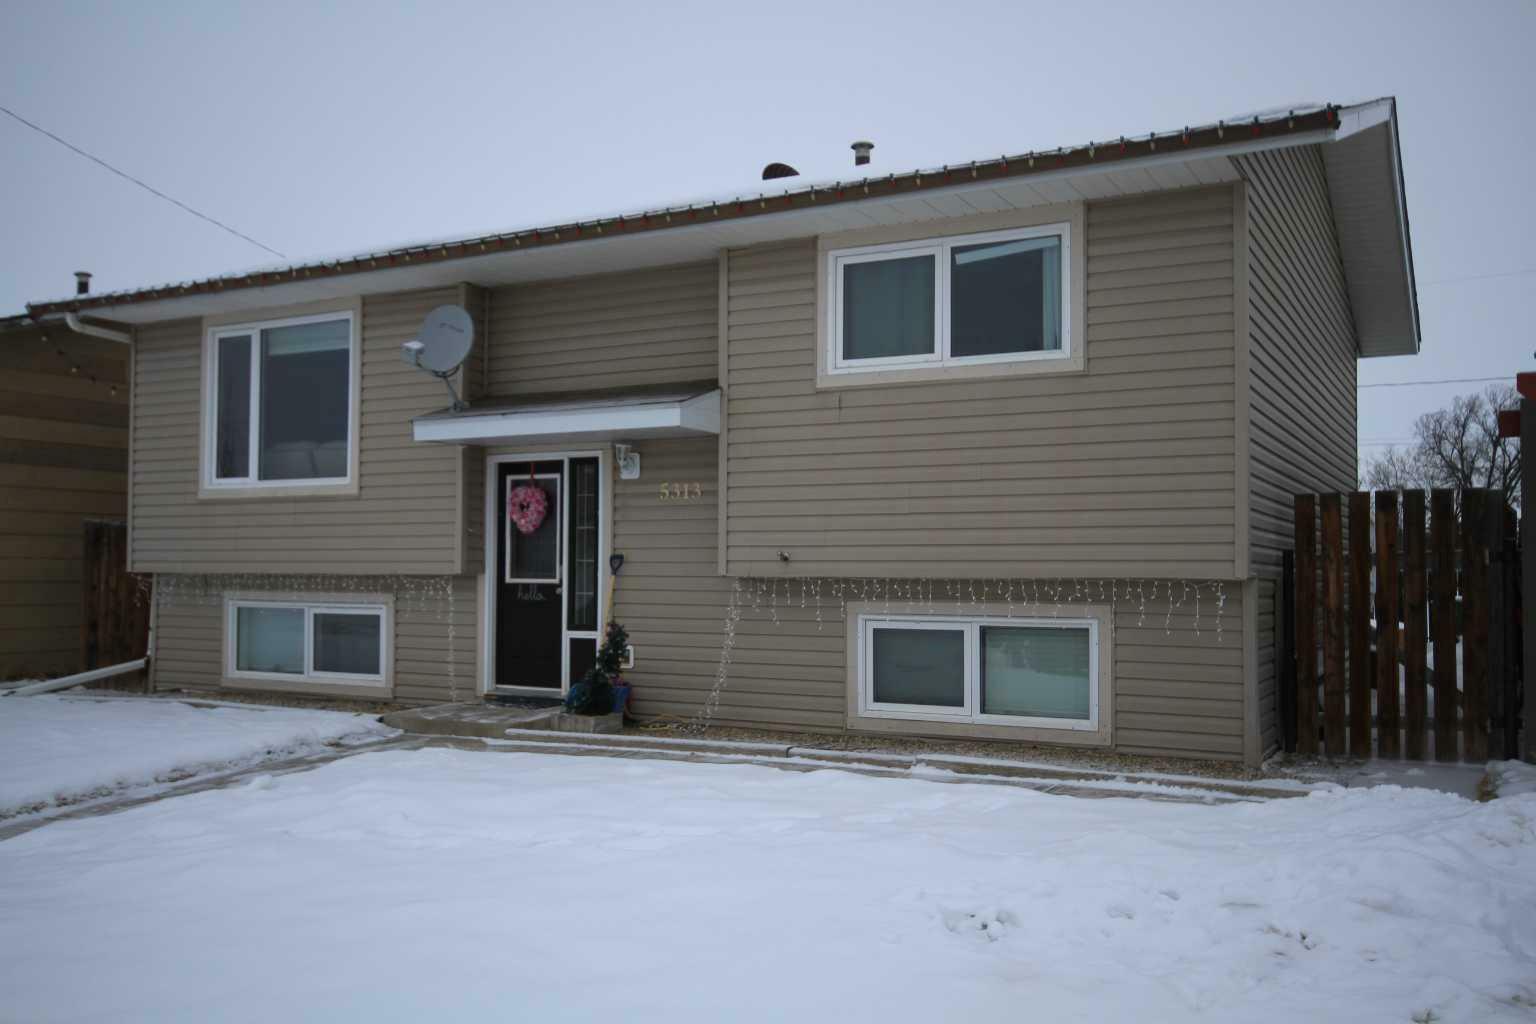 5313 39 Ave.  Taber AB T1G 1C6 photo